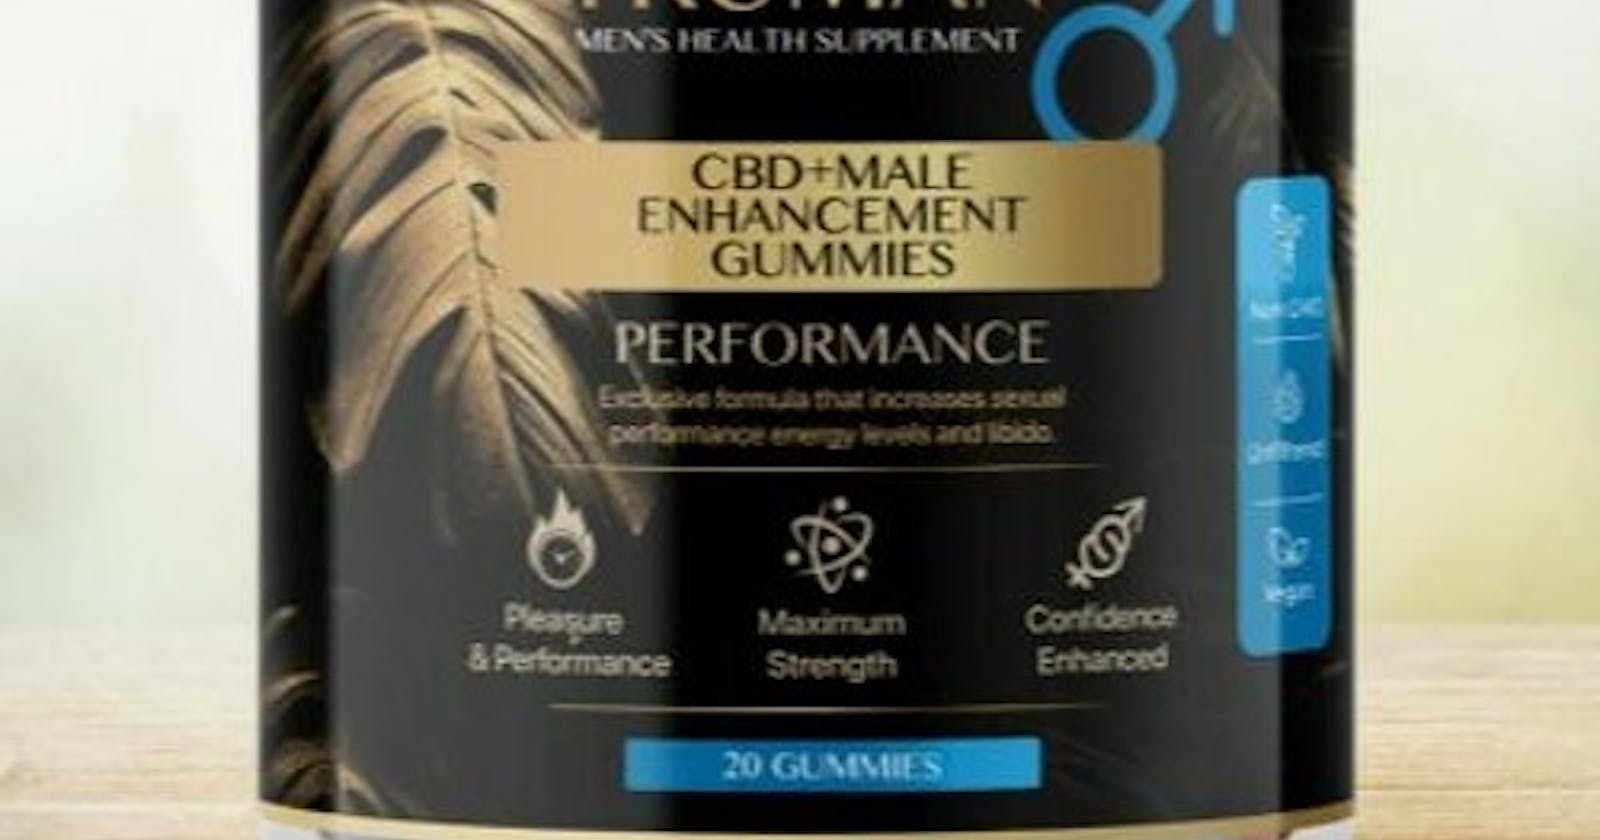 Truman Plus Male Enhancement Don’t Take Before Know This Is It Really Effective?